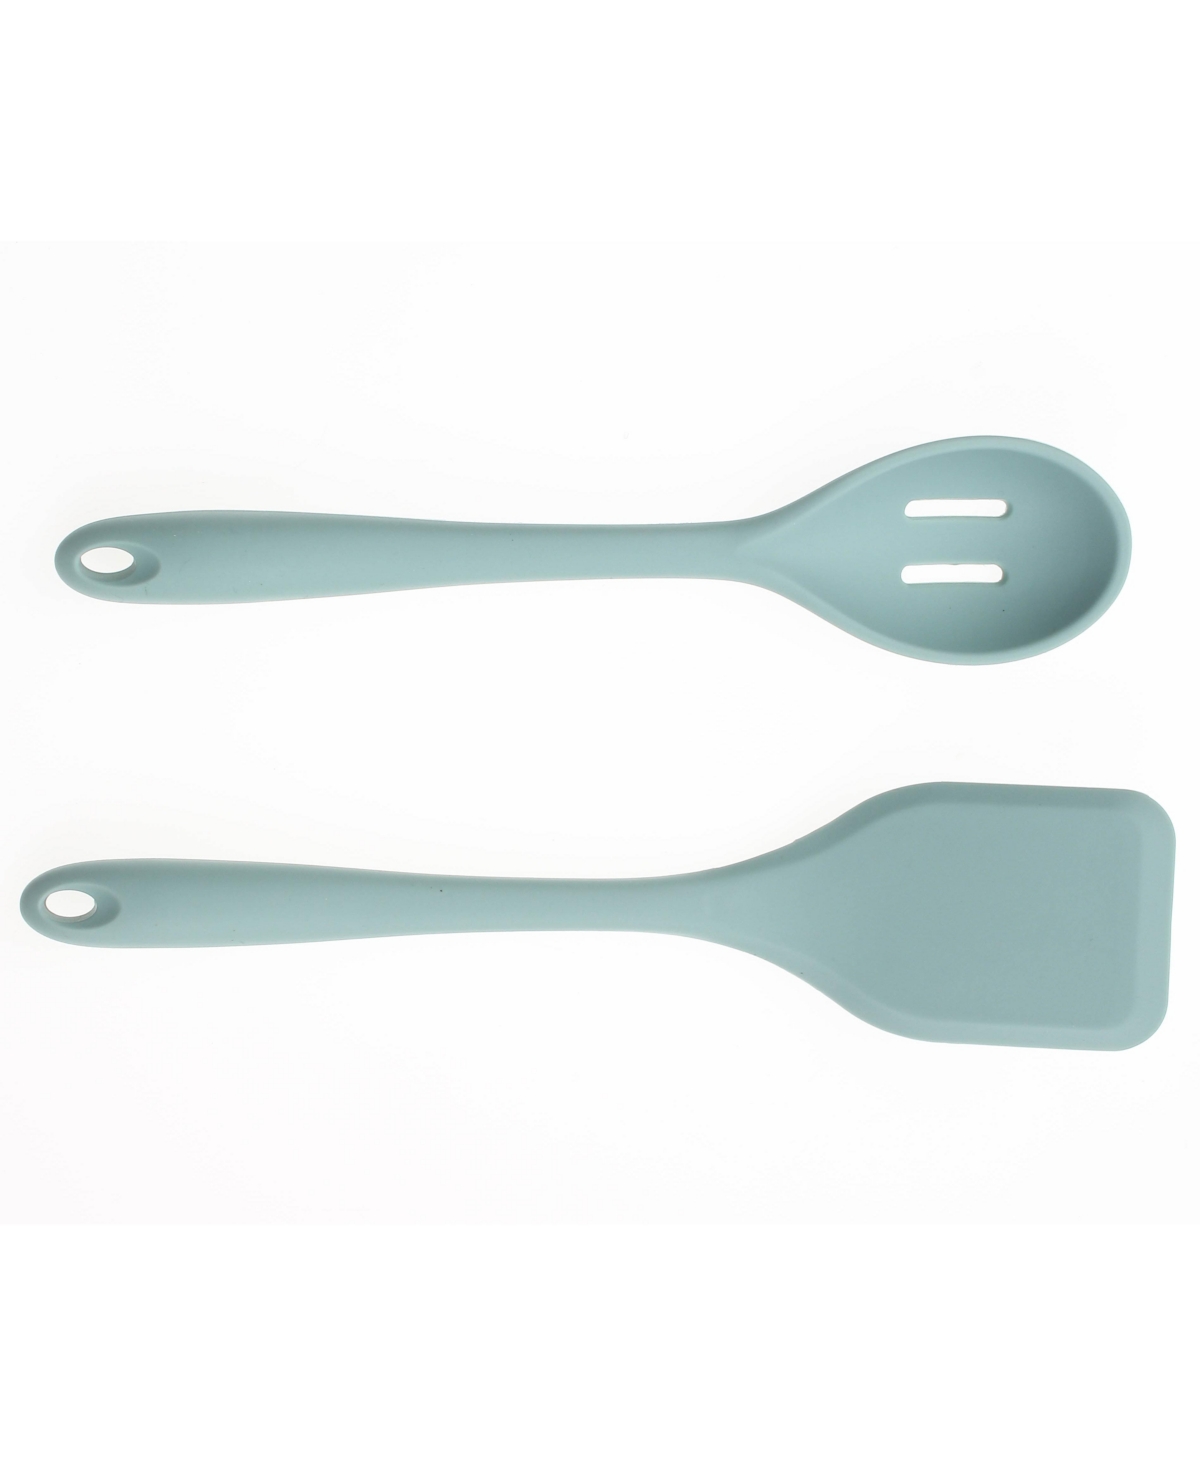 Art & Cook 2 Piece Silicone Solid Turner And Slotted Spoon Set In Prestige